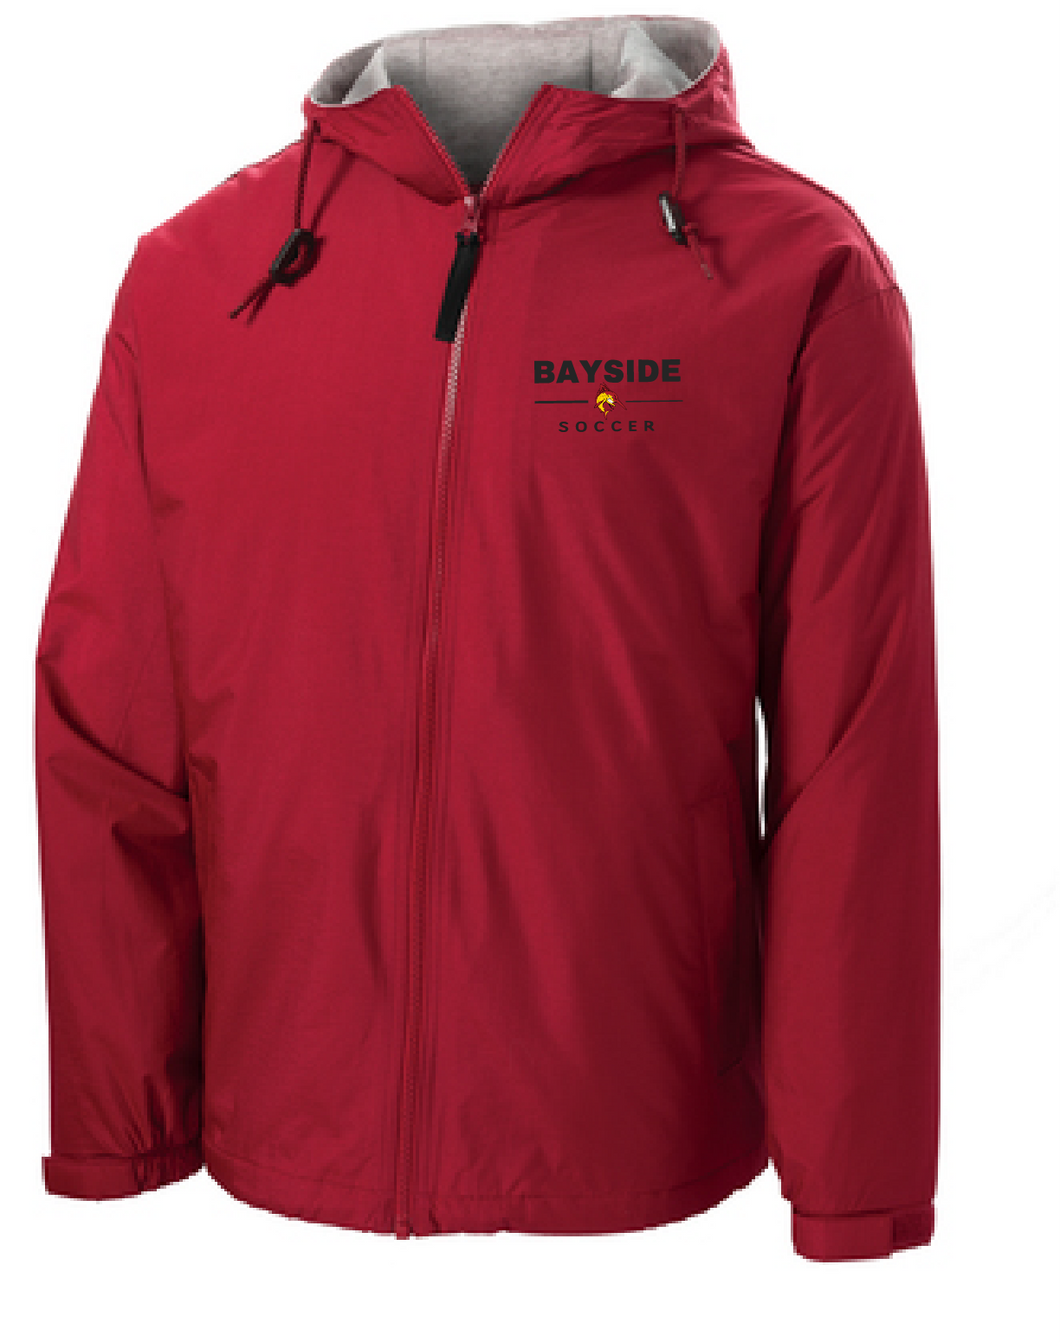 Insulated Team Jacket / Red / Bayside High School Soccer